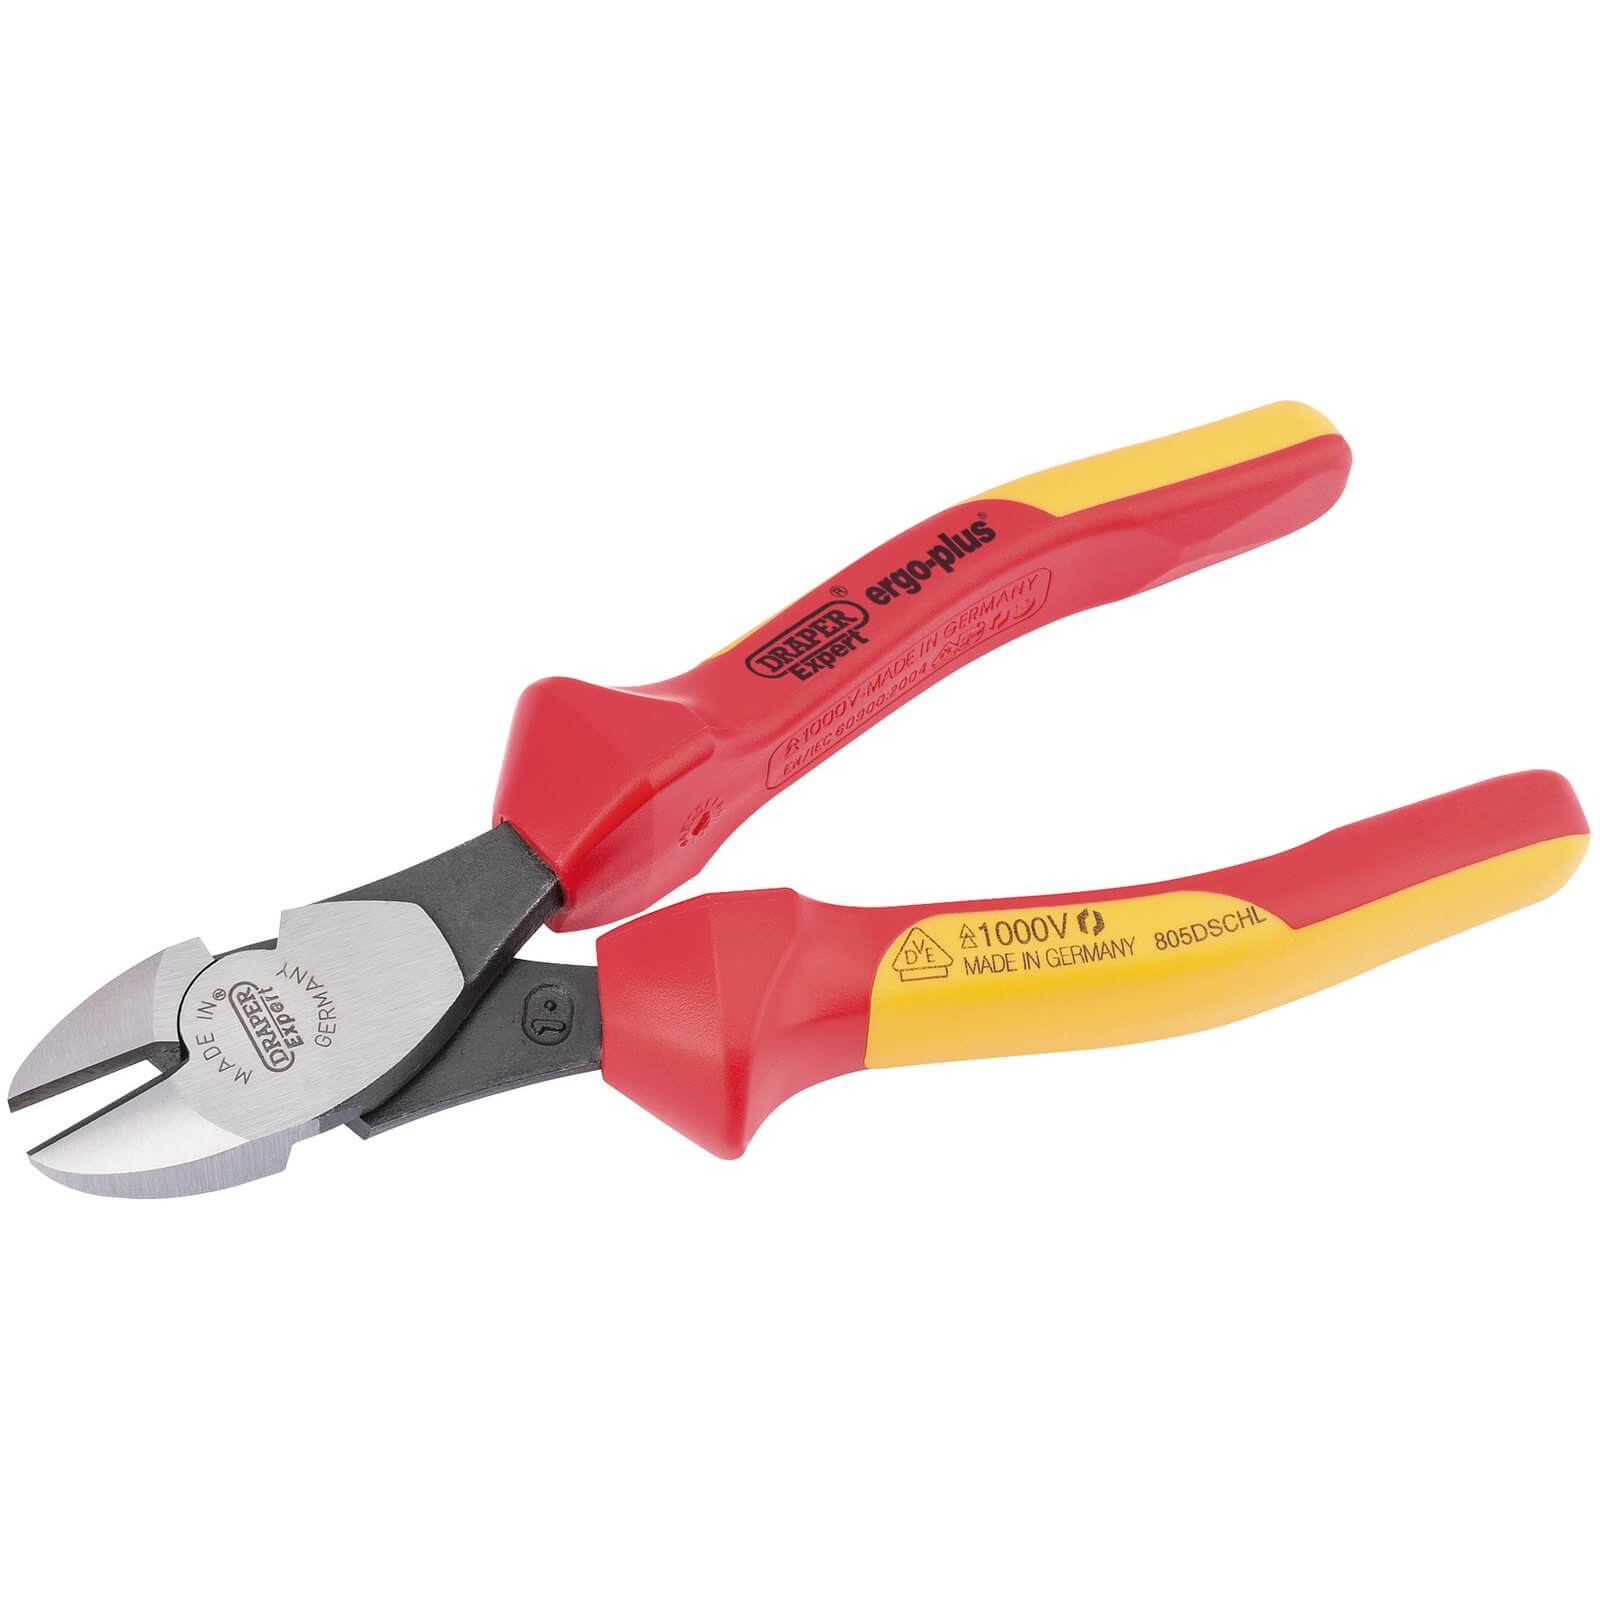 Photo of Draper Expert Ergo Plus Vde Insulated High Leverage Side Cutters 180mm